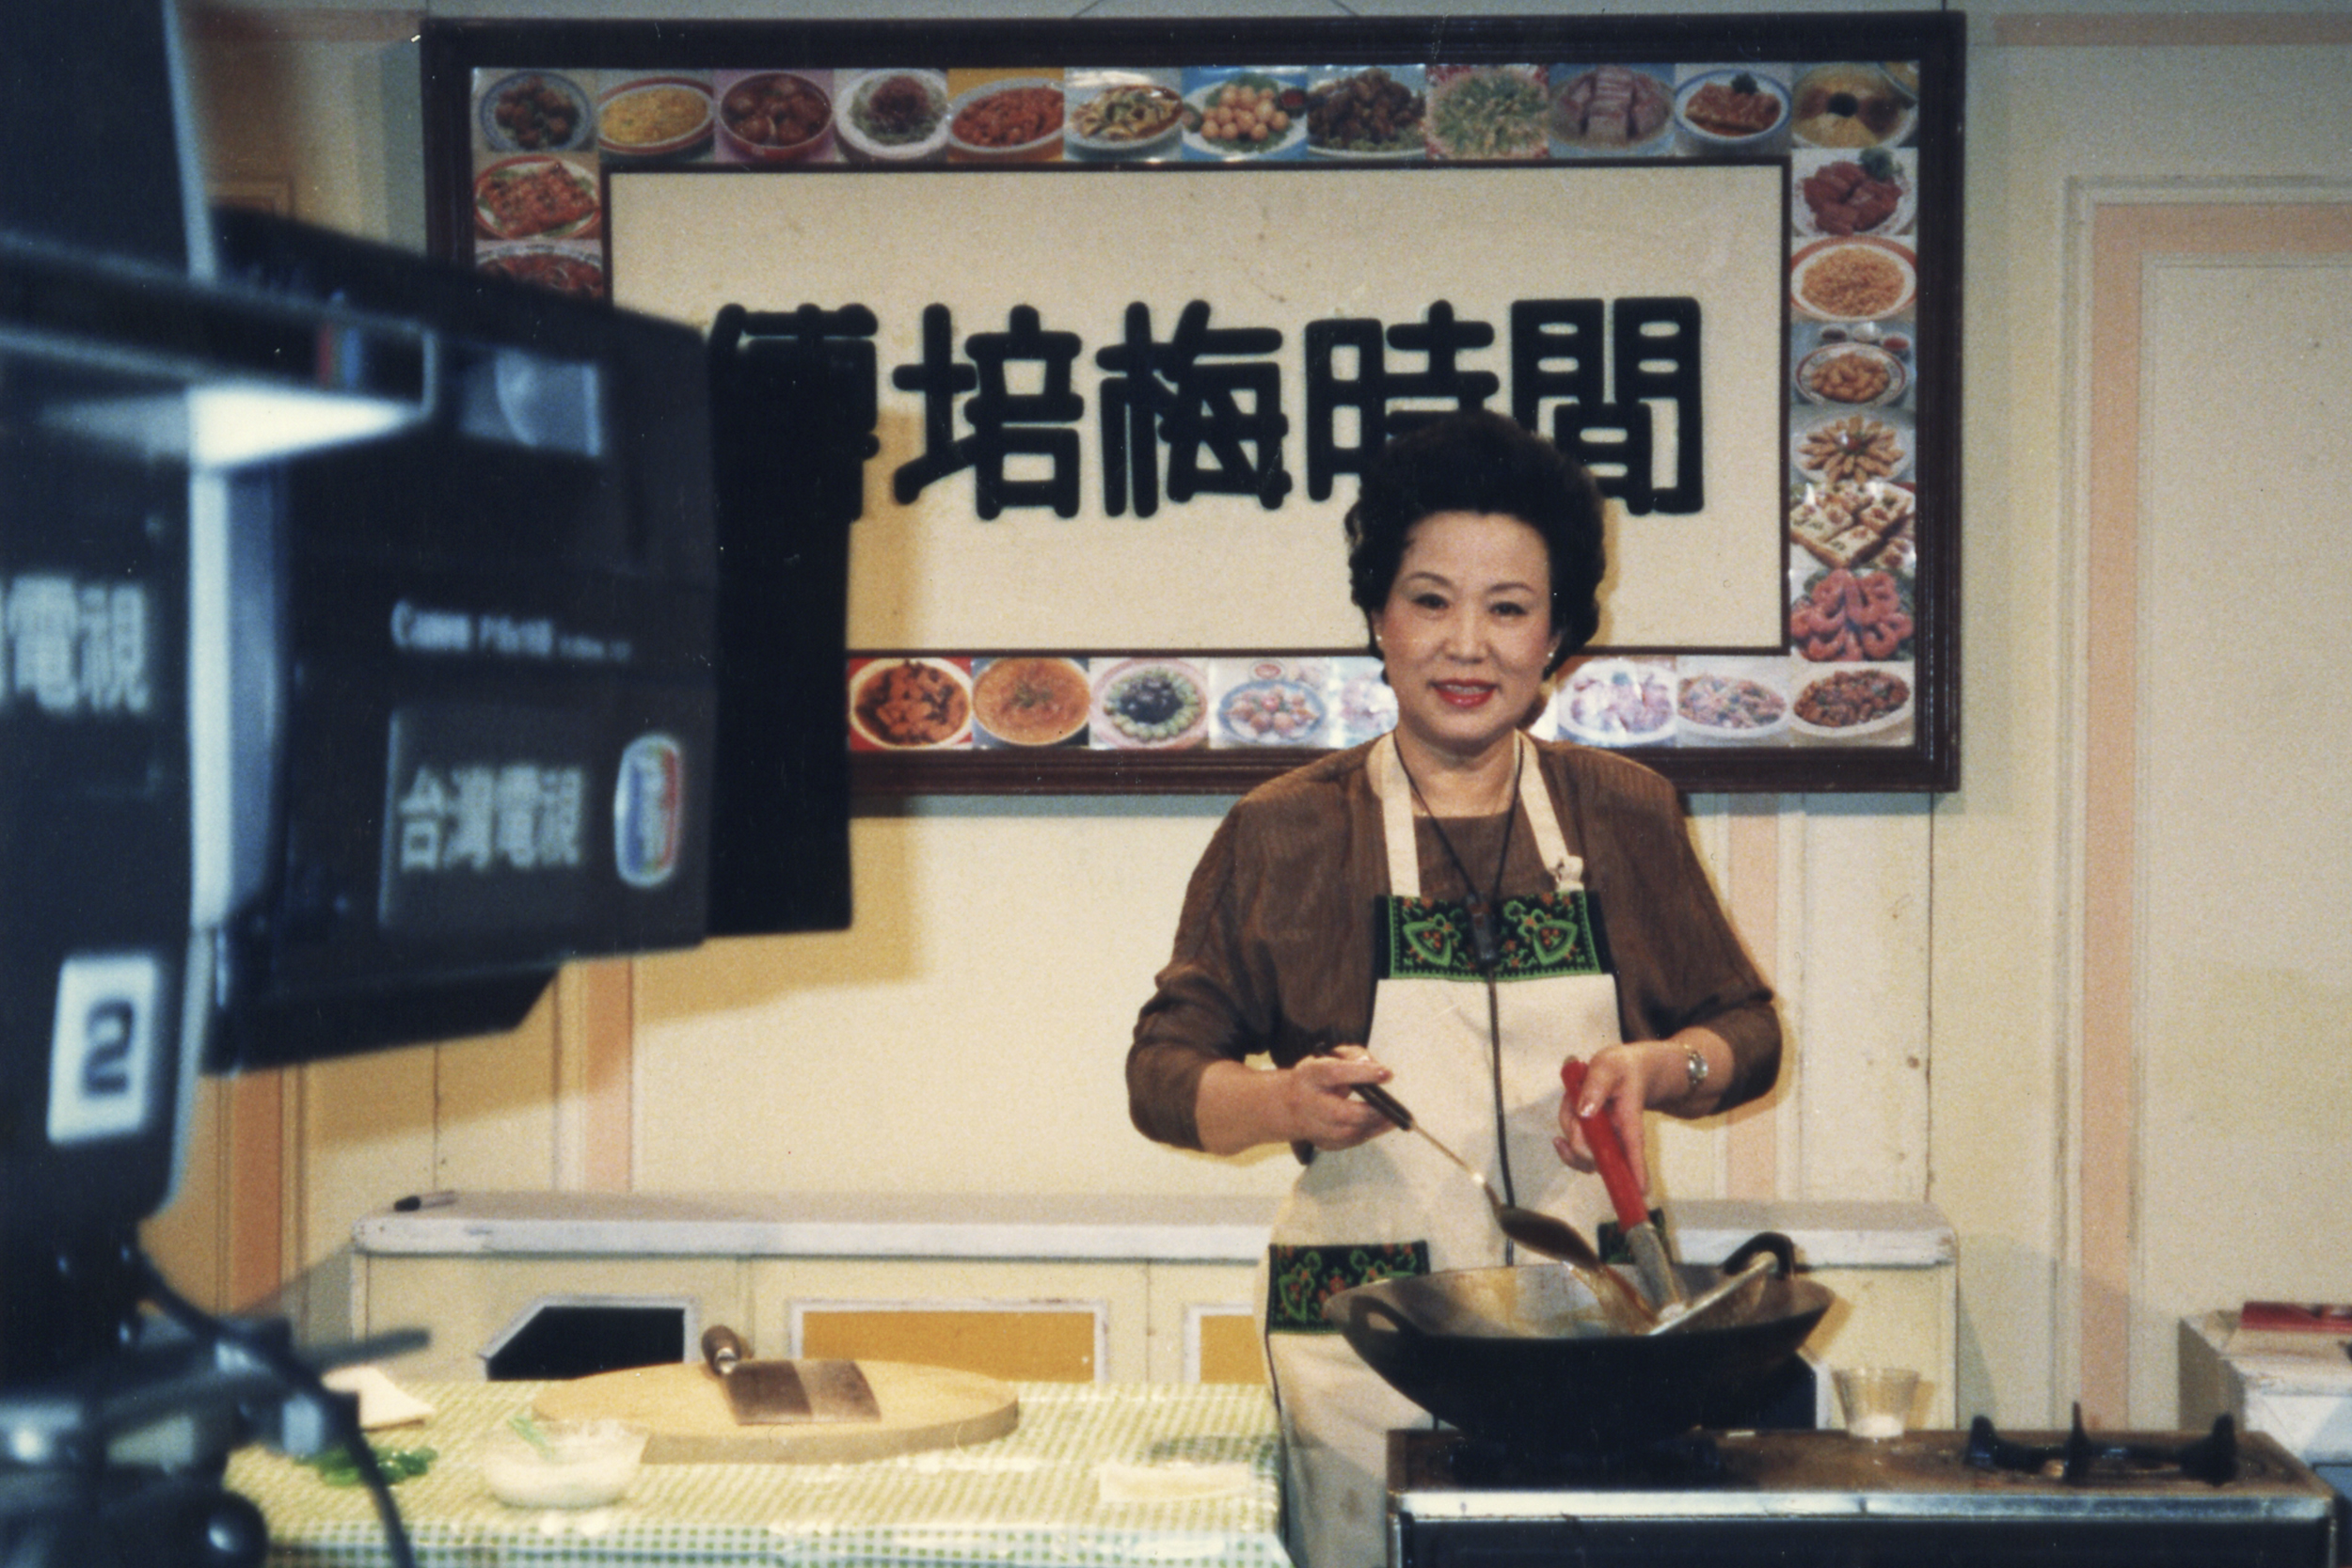 Fu Pei-mei cooks on her cooking show in the 1980s